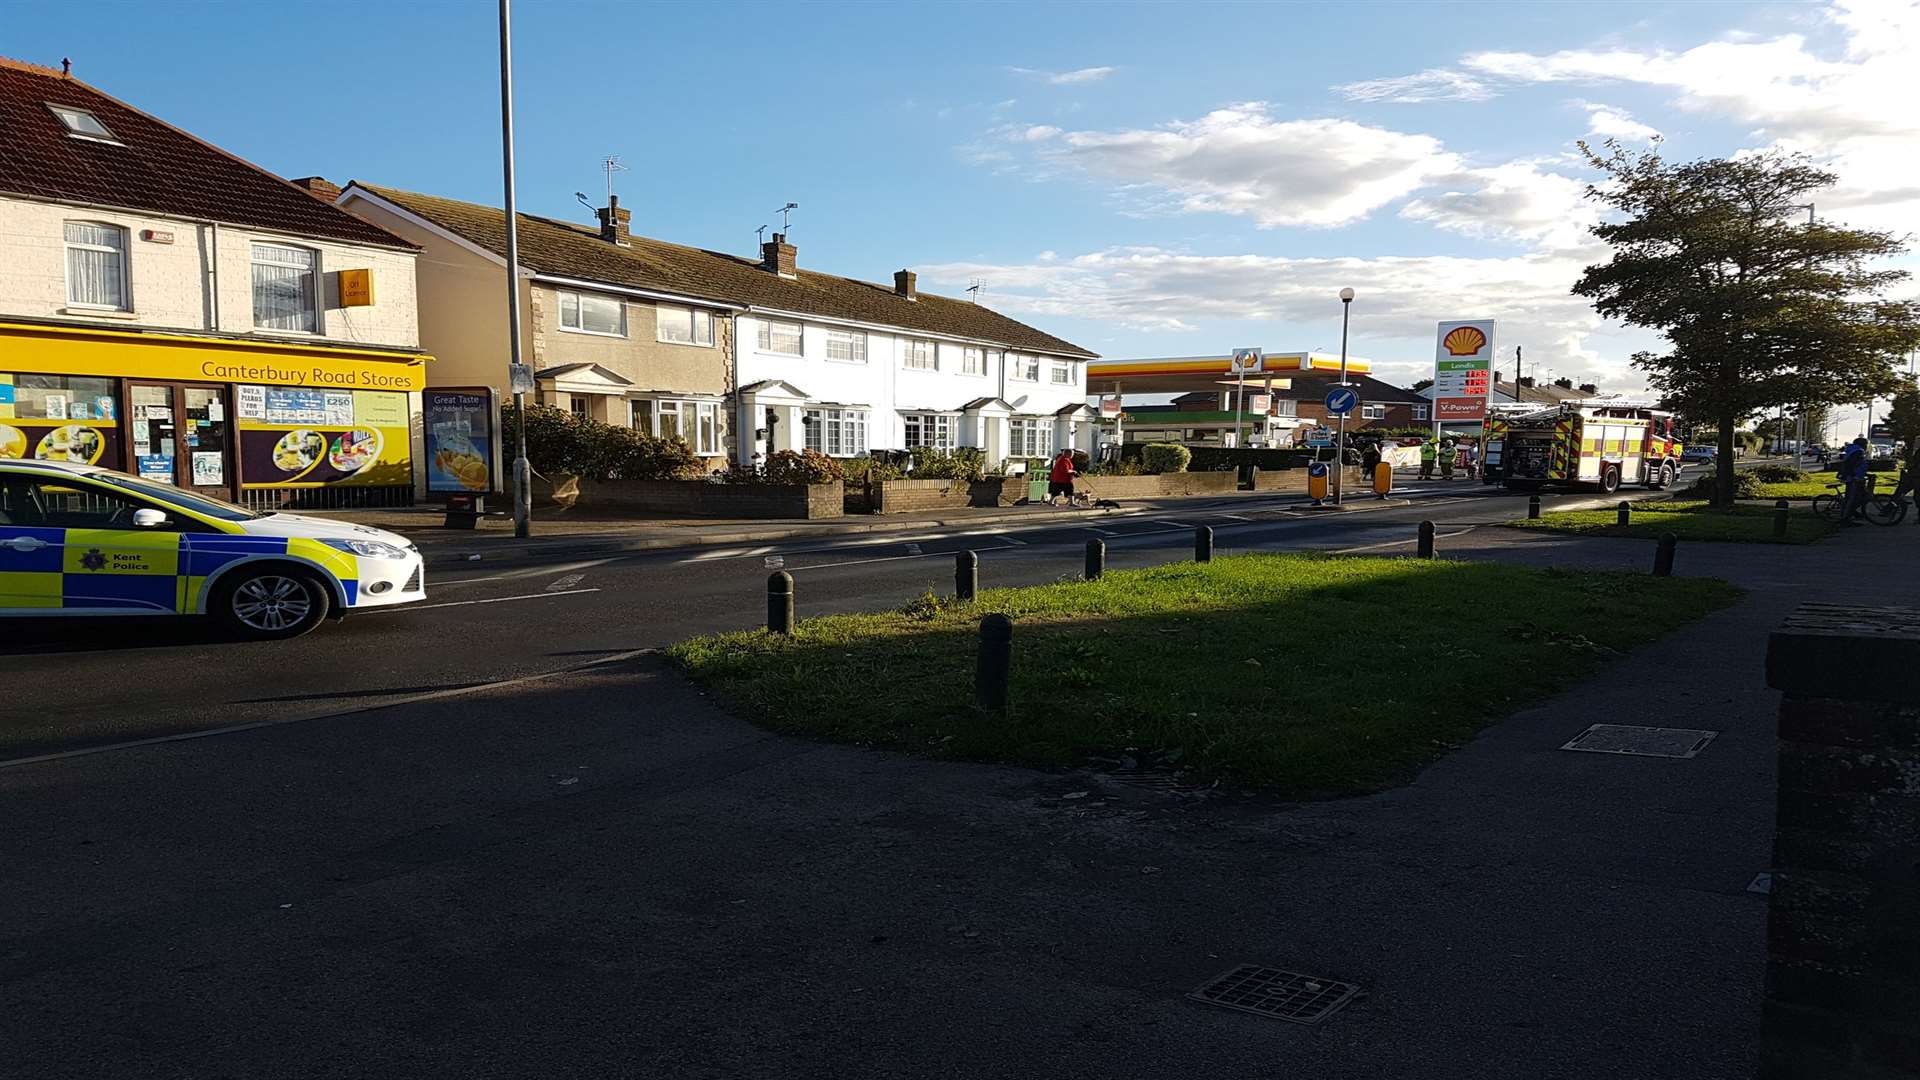 The scene on the A28 in Birchington. Picture: Chris Kidman